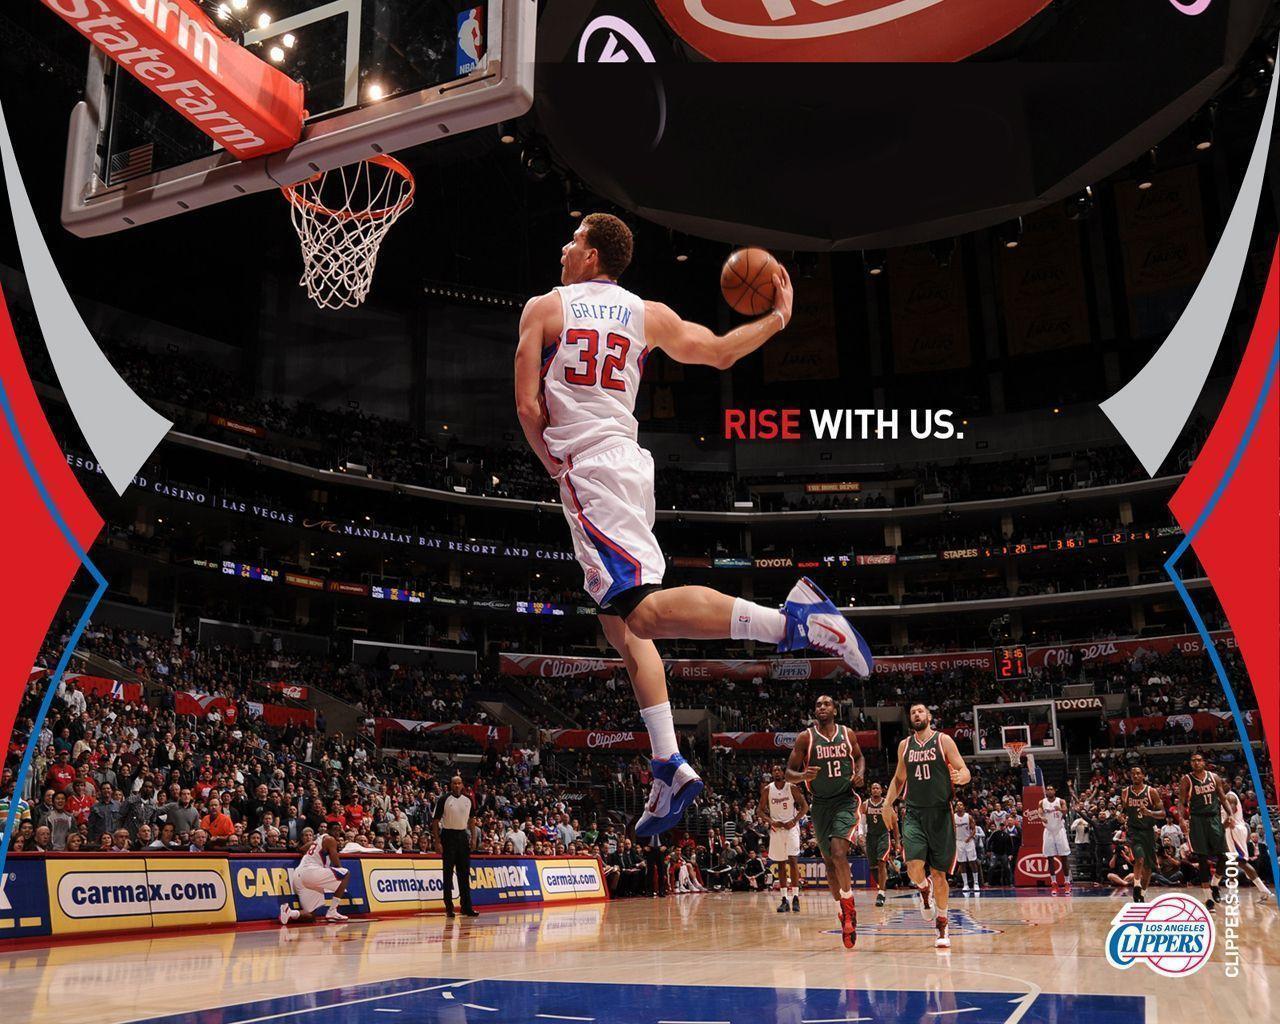 Clippers Wallpaper. THE OFFICIAL SITE OF THE LOS ANGELES CLIPPERS